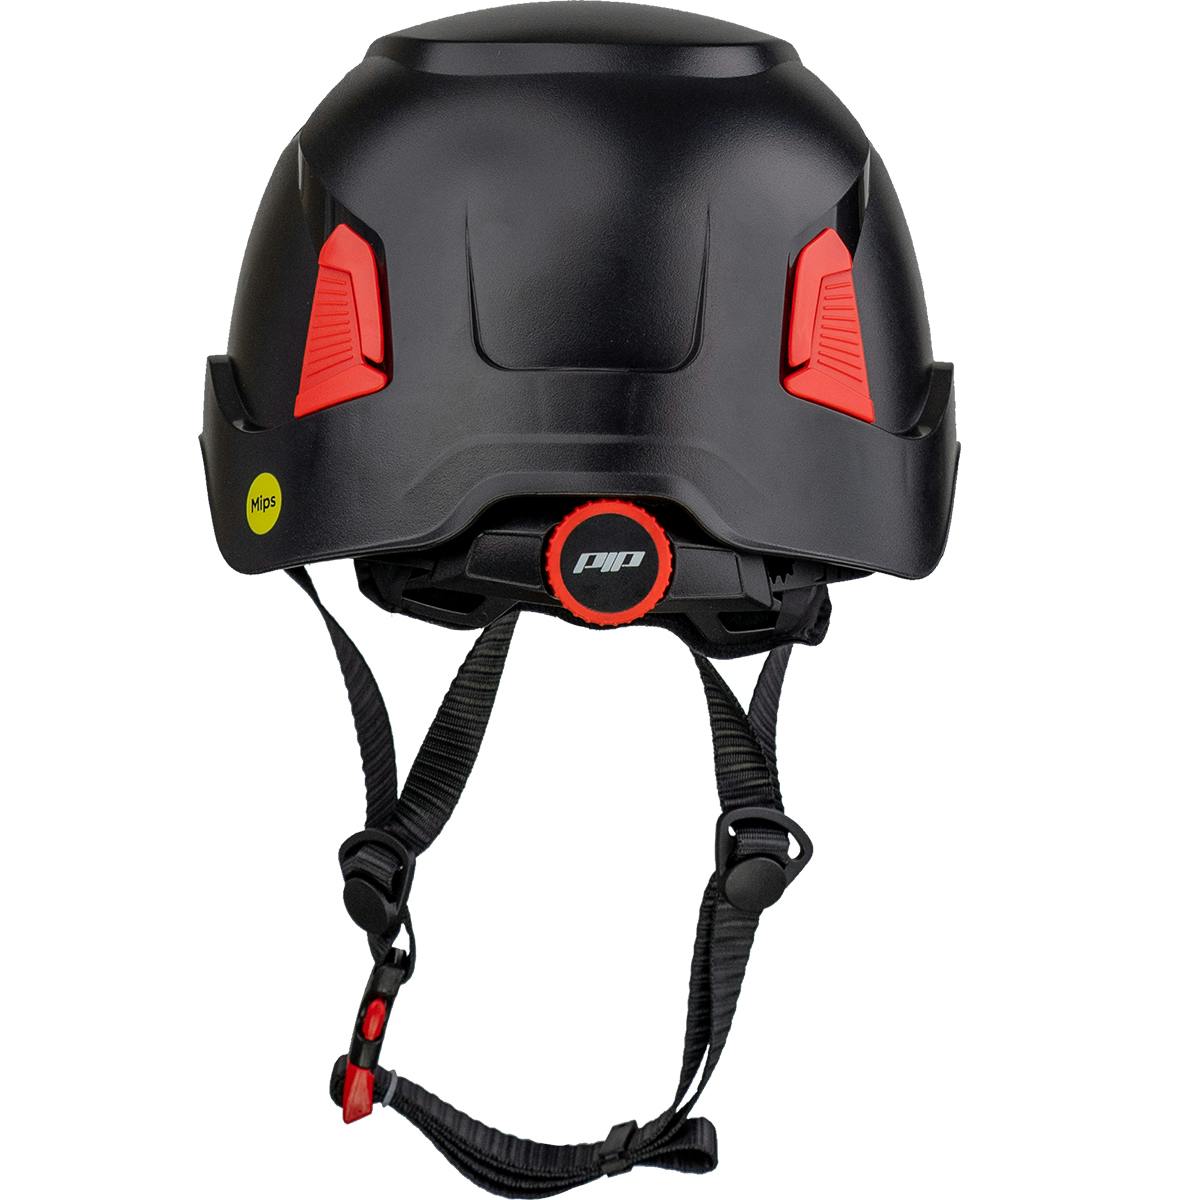 Traverse™ Vented, Industrial Climbing Helmet with Mips® Technology, ABS Shell, EPS Foam Impact Liner, HDPE Suspension, Wheel Ratchet Adjustment and 4-Point Chin Strap (280-HP1491RVM)_0